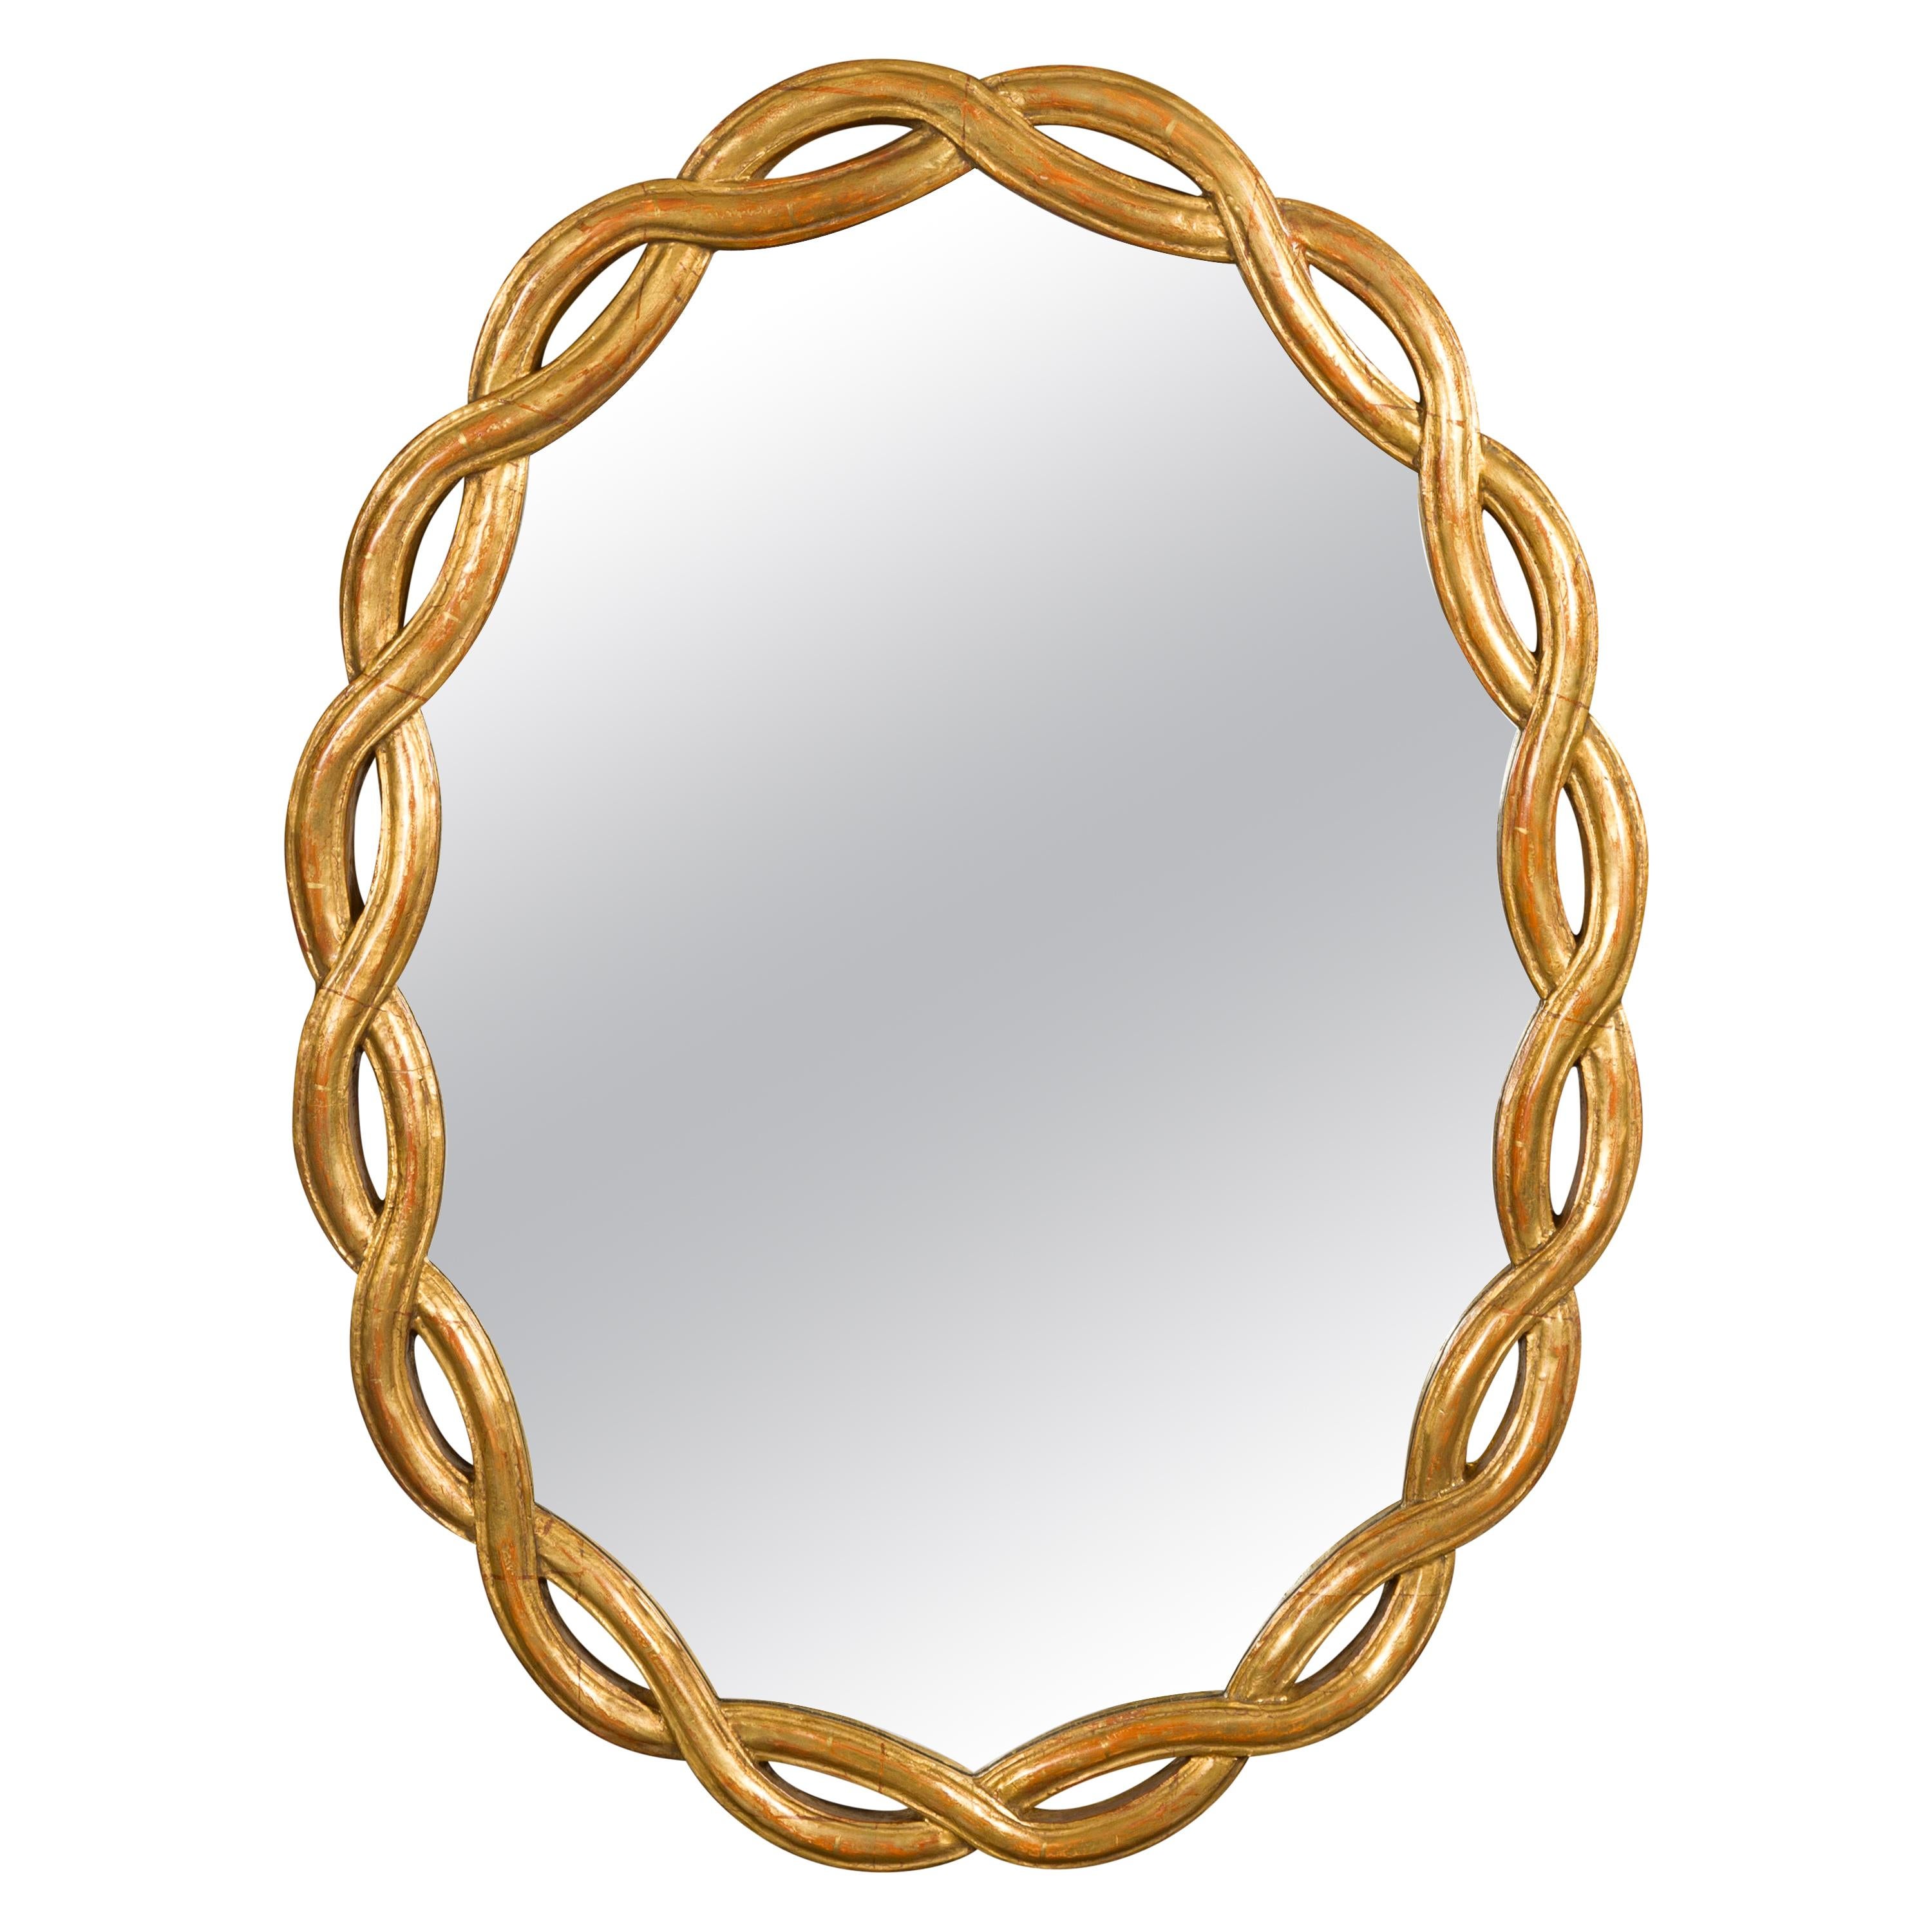 Vintage Italian Midcentury Giltwood Oval Mirror with Intertwining Motifs